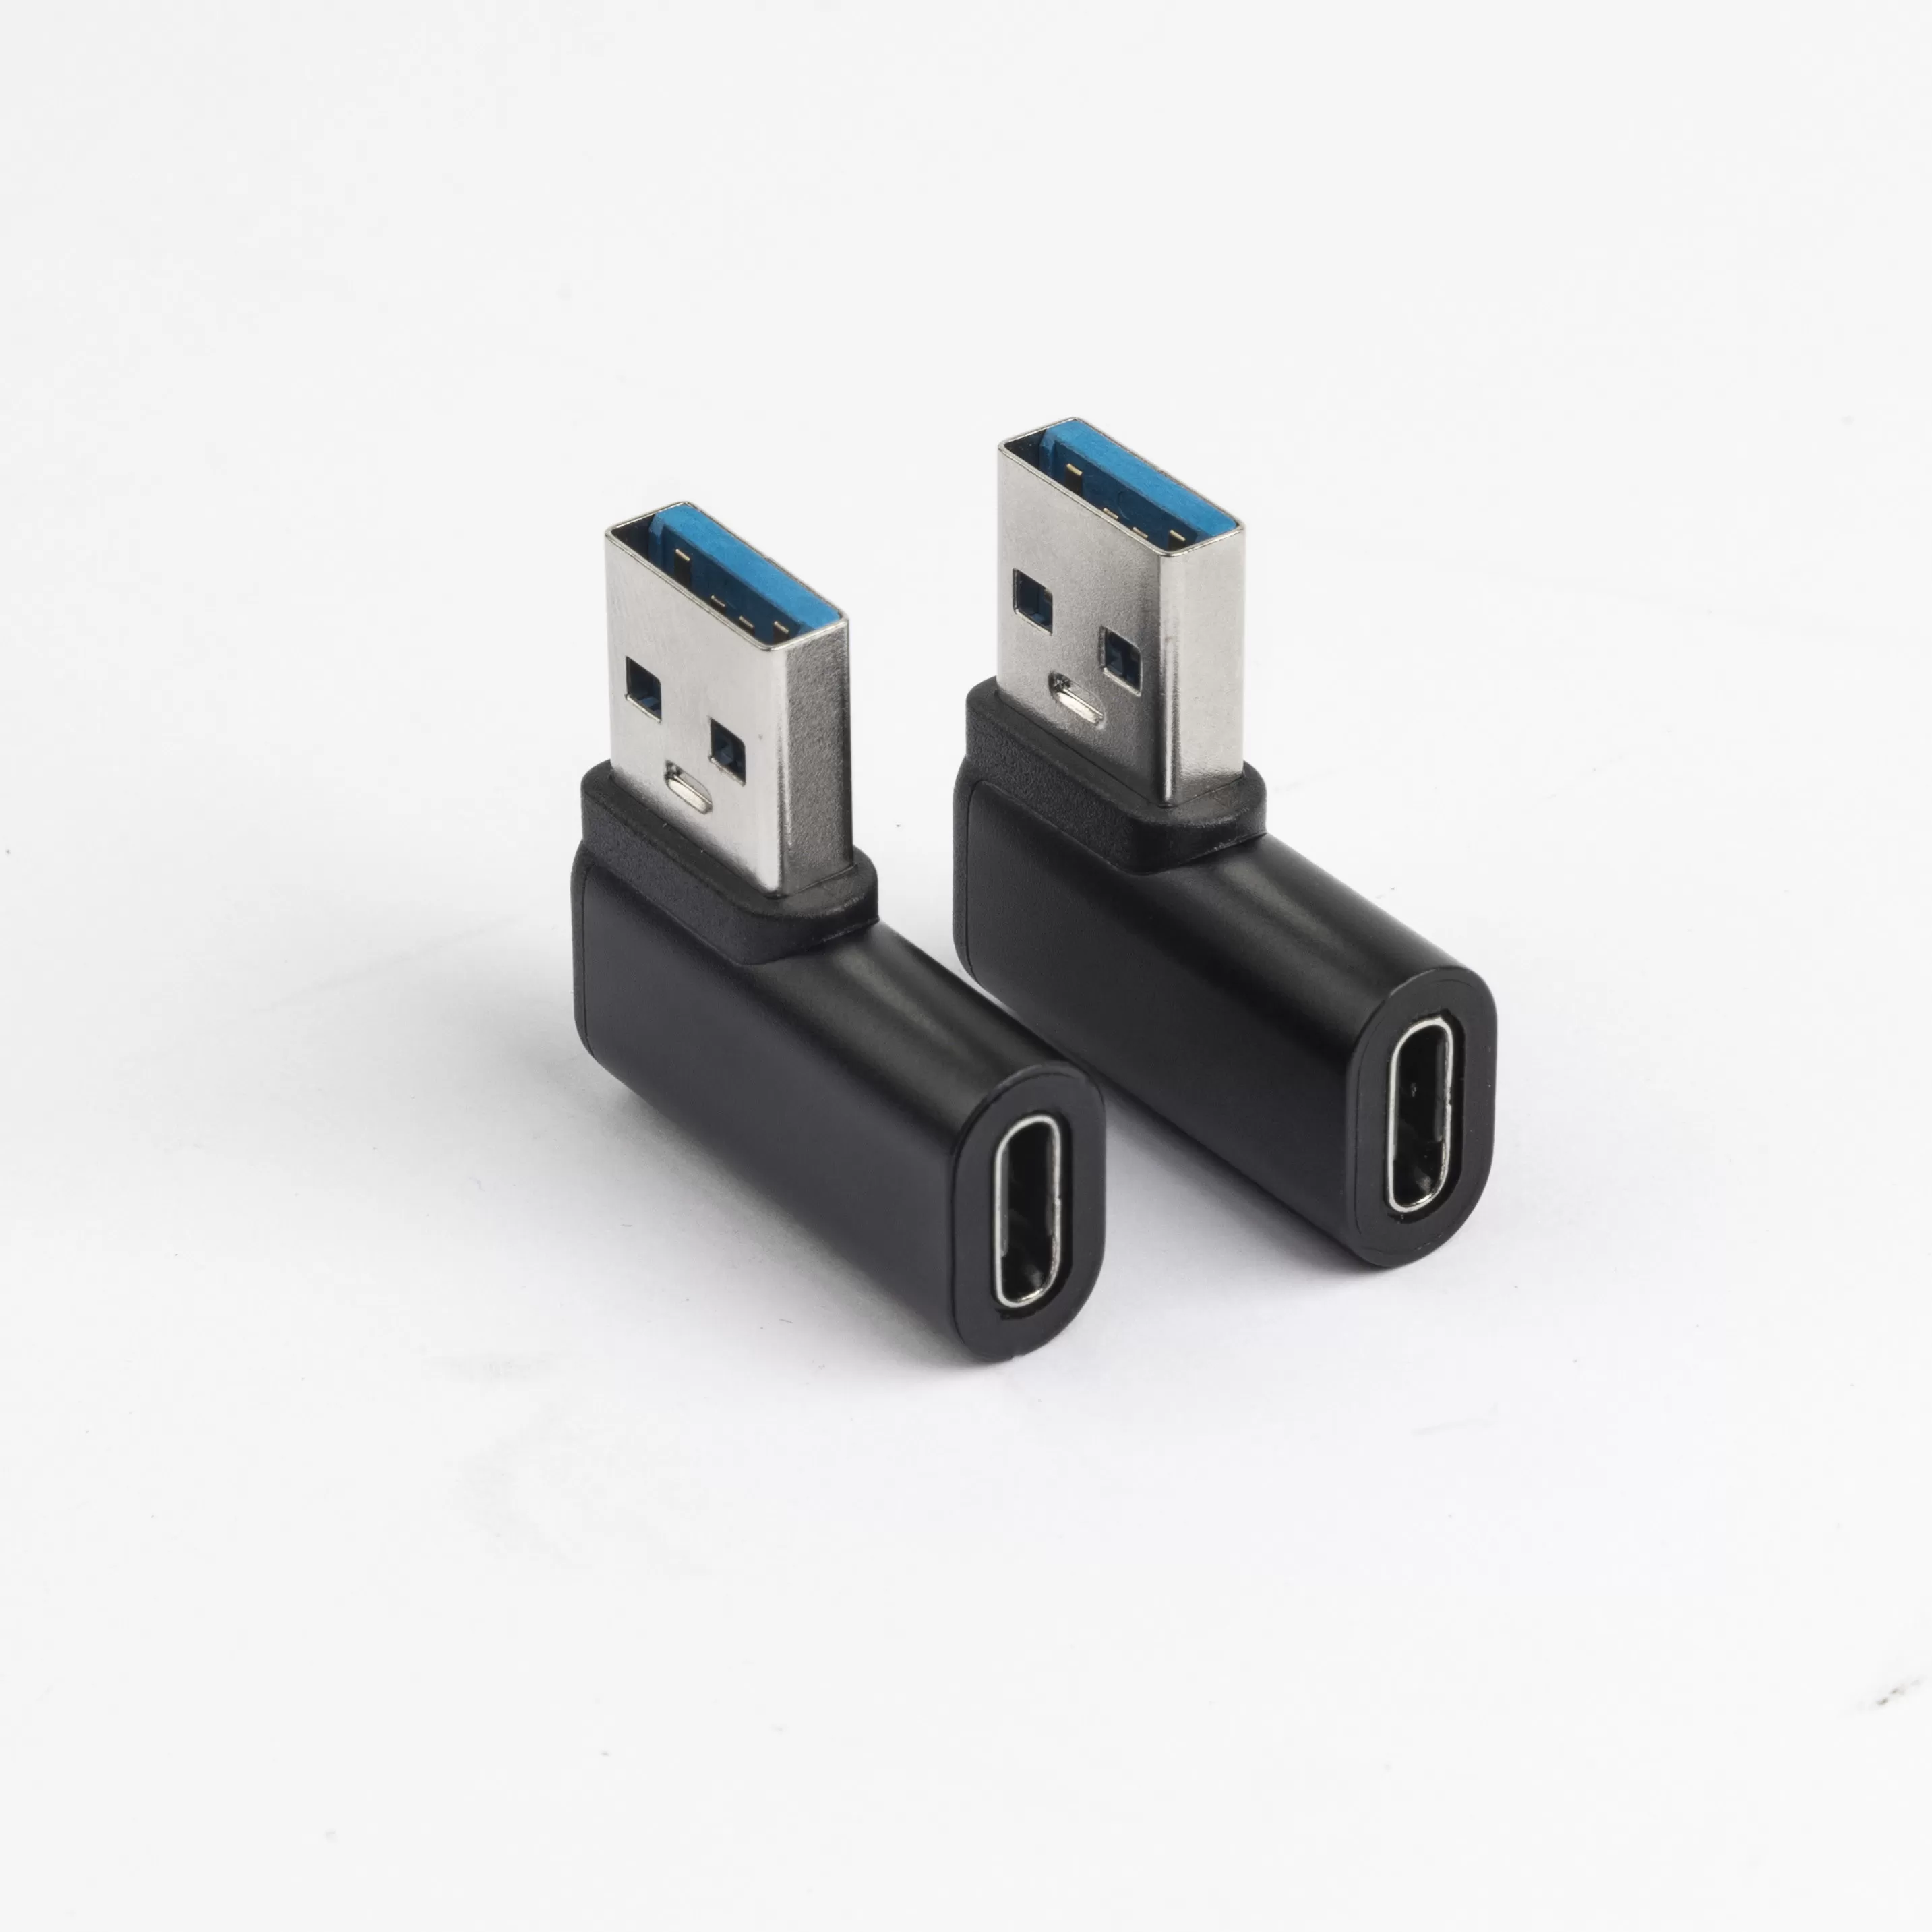 Right Angle USB C Female Adapter to USB Male